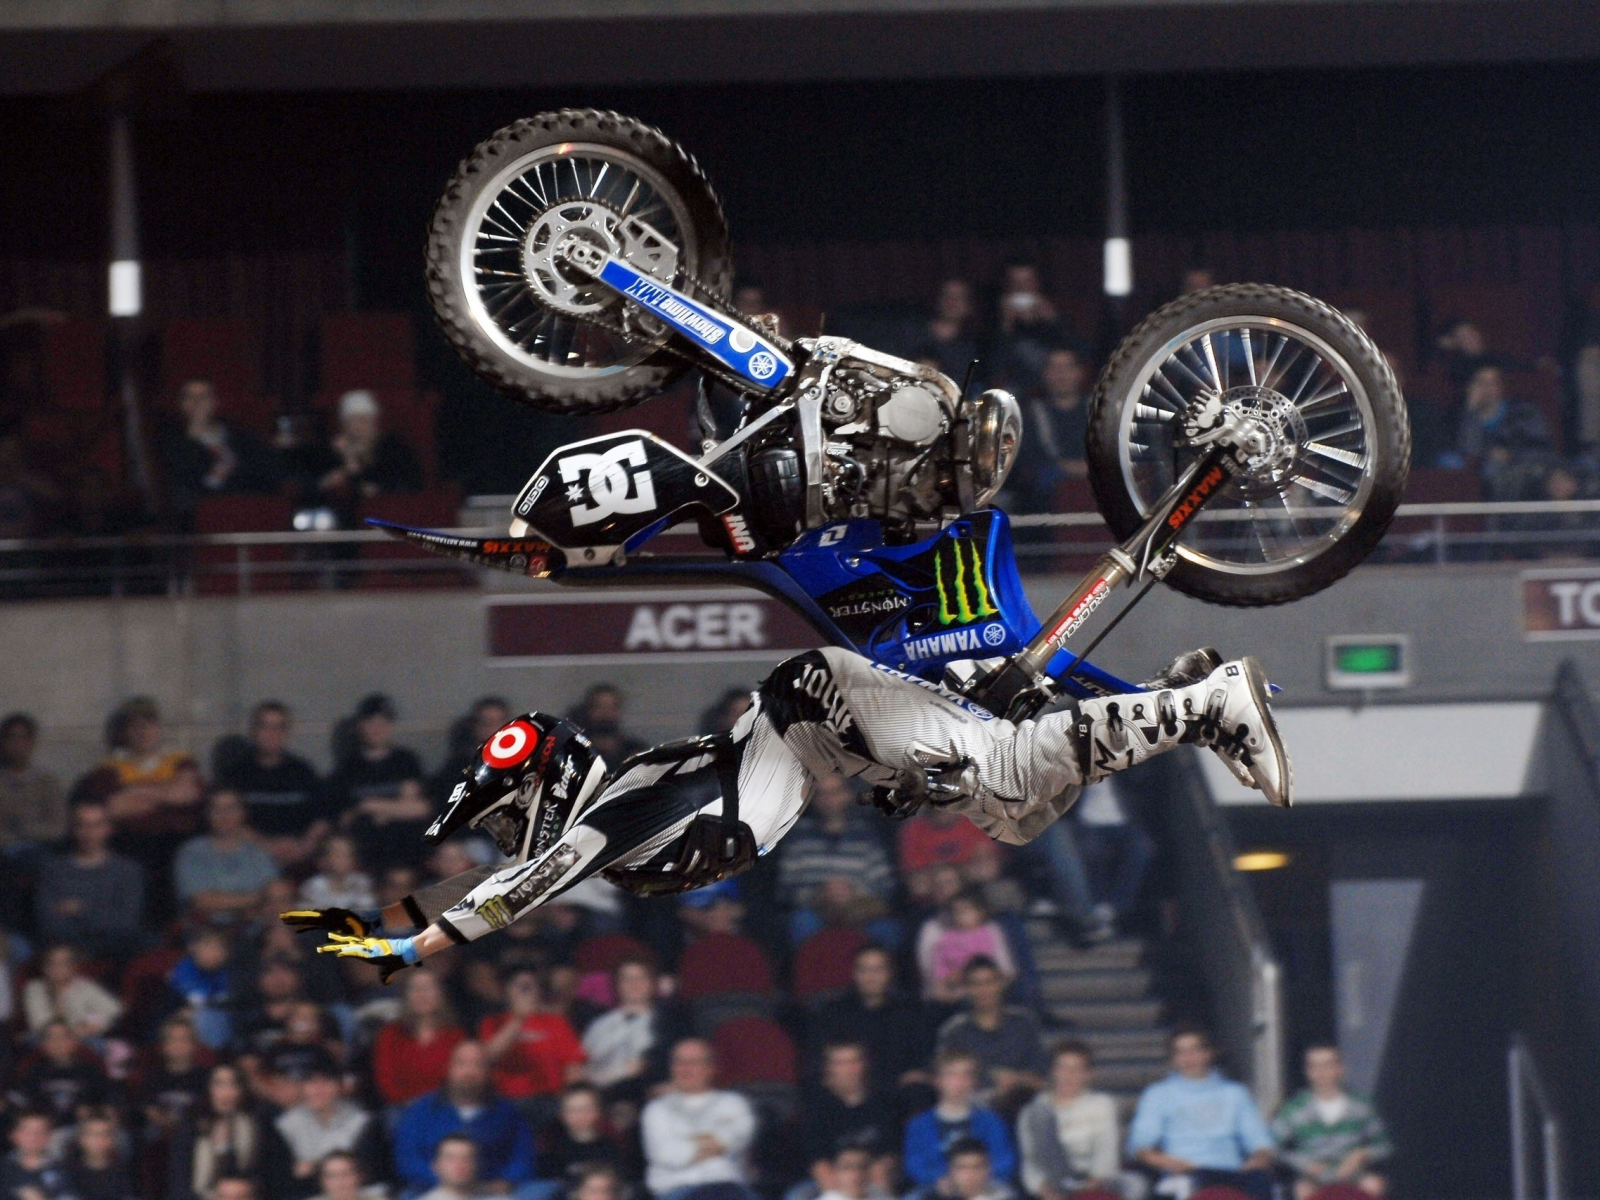 x-fighters, 1920x1200, x-games, rom, wallpapers, дадя васяe, 2011